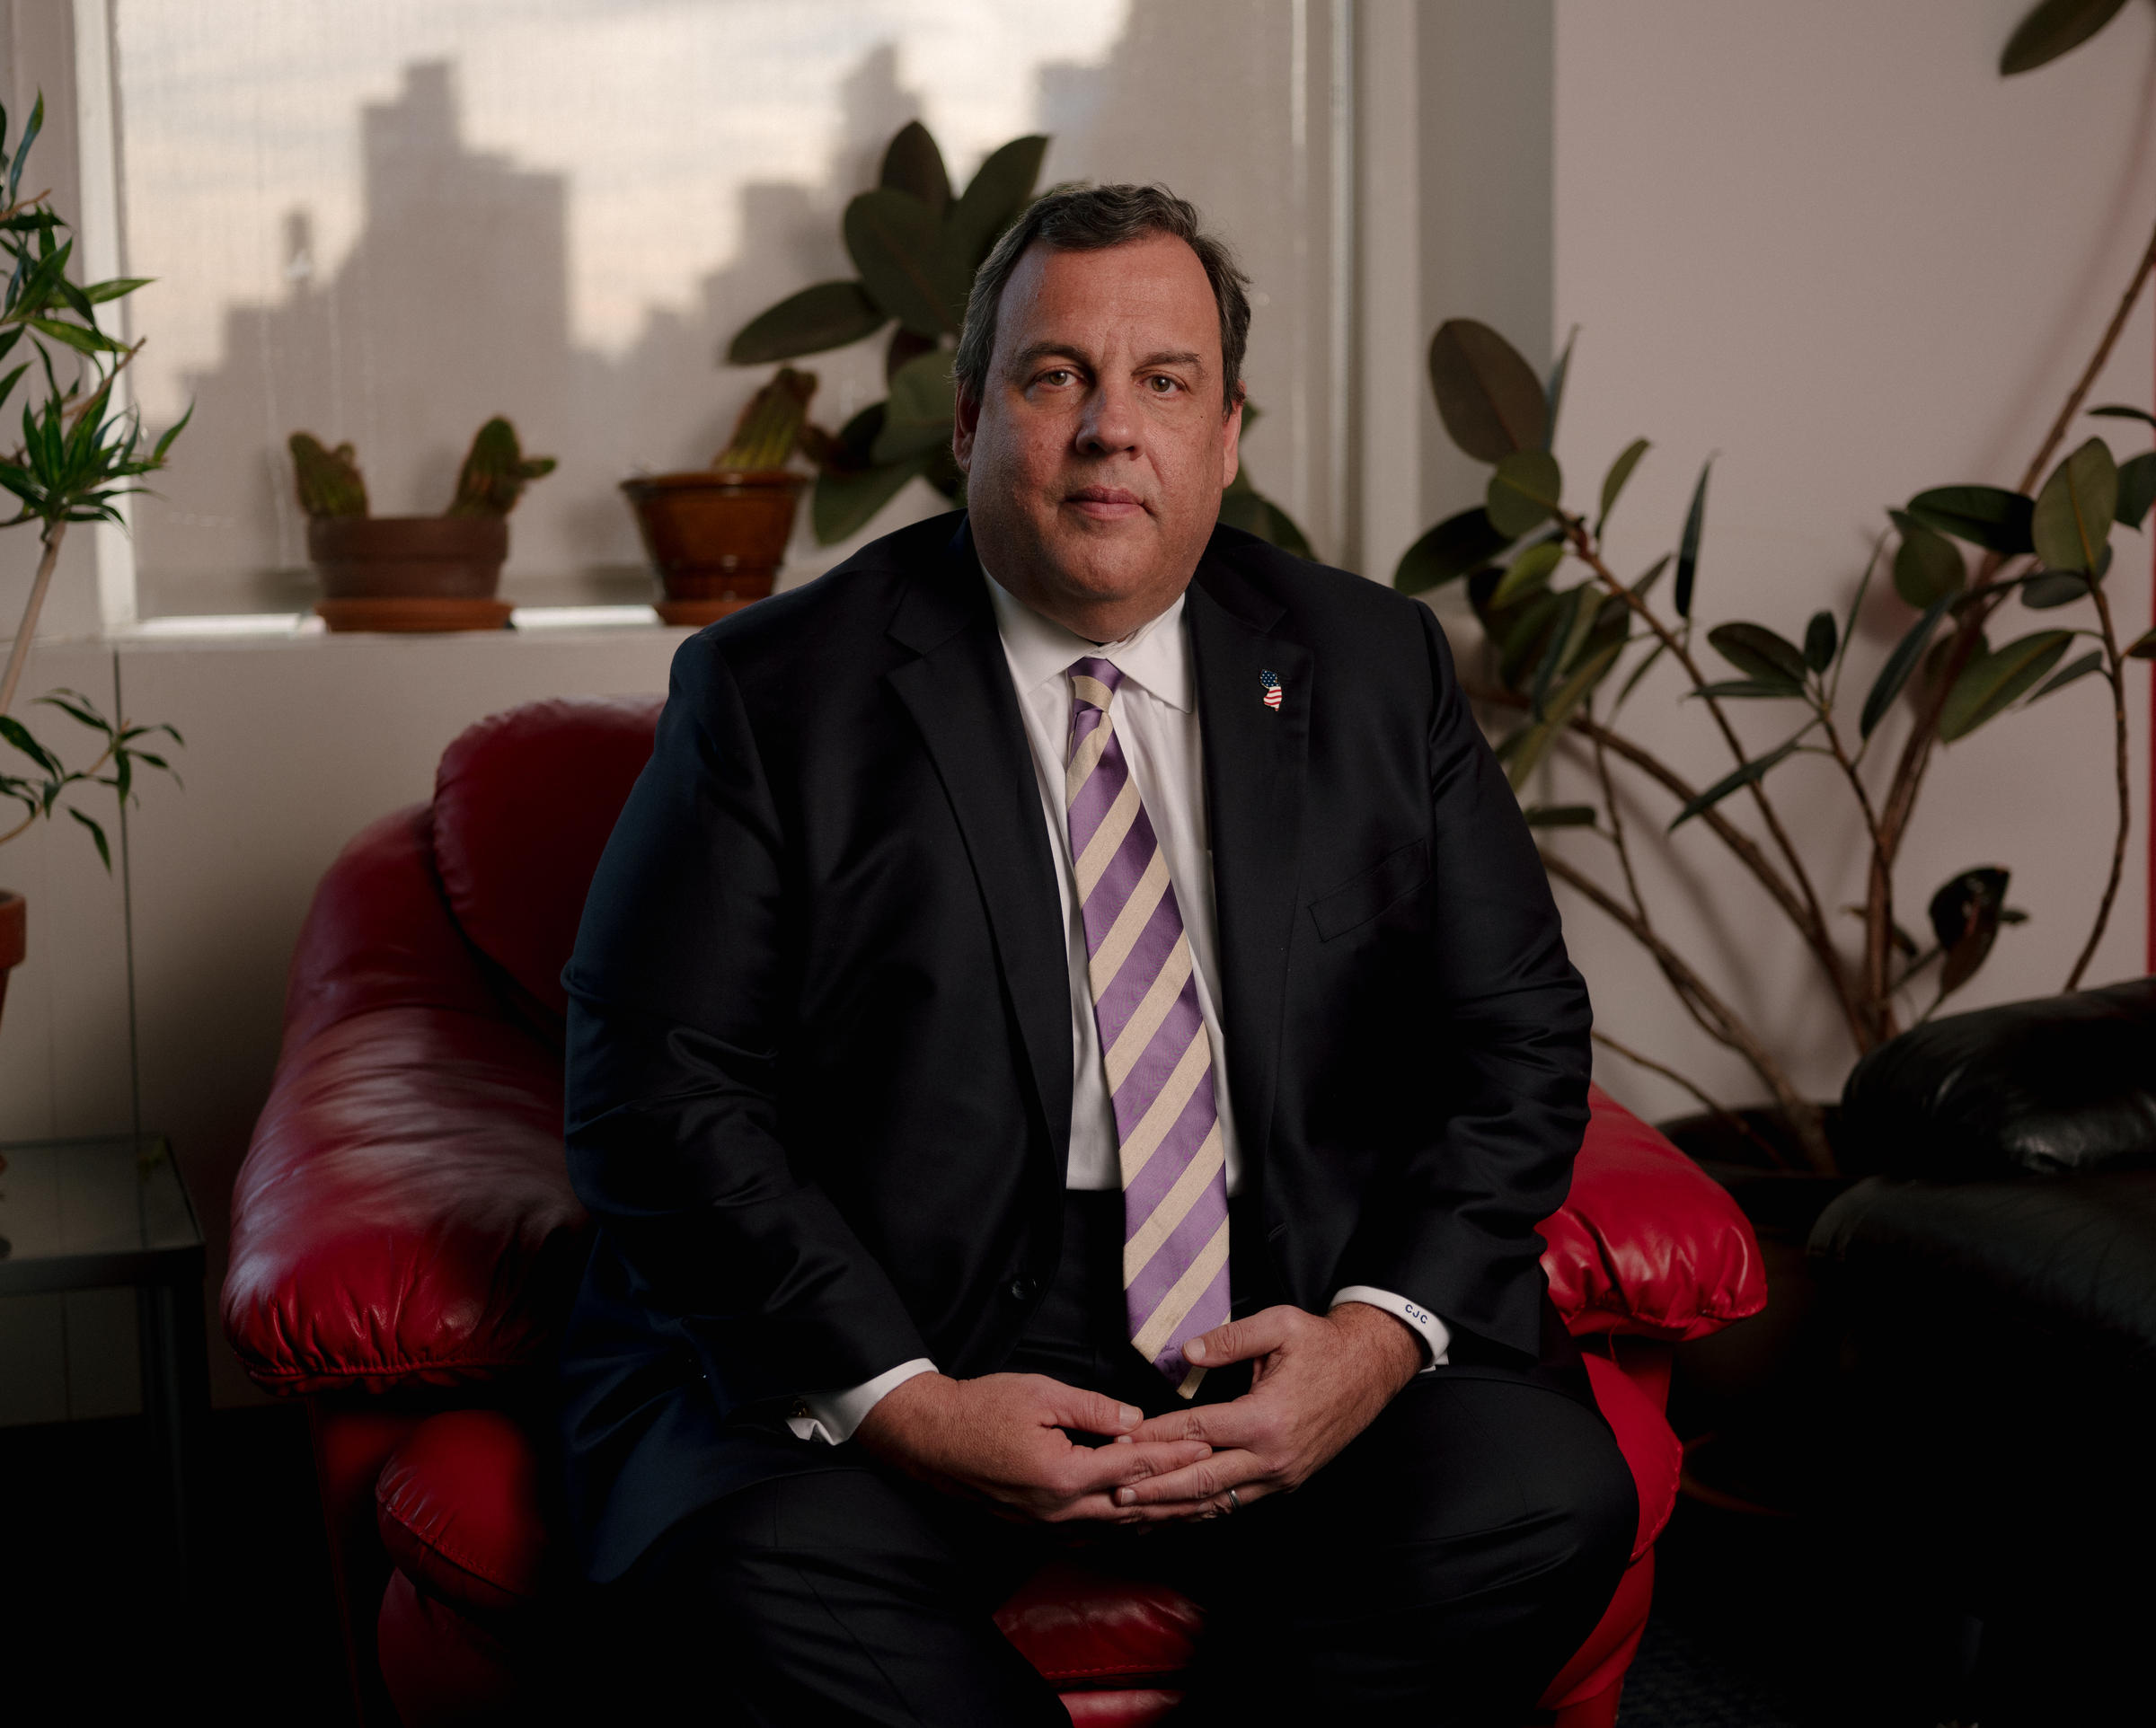 Chris Christie: There Is No One With More Influence Over Trump Than Jared Kushner | WSIU2400 x 1924